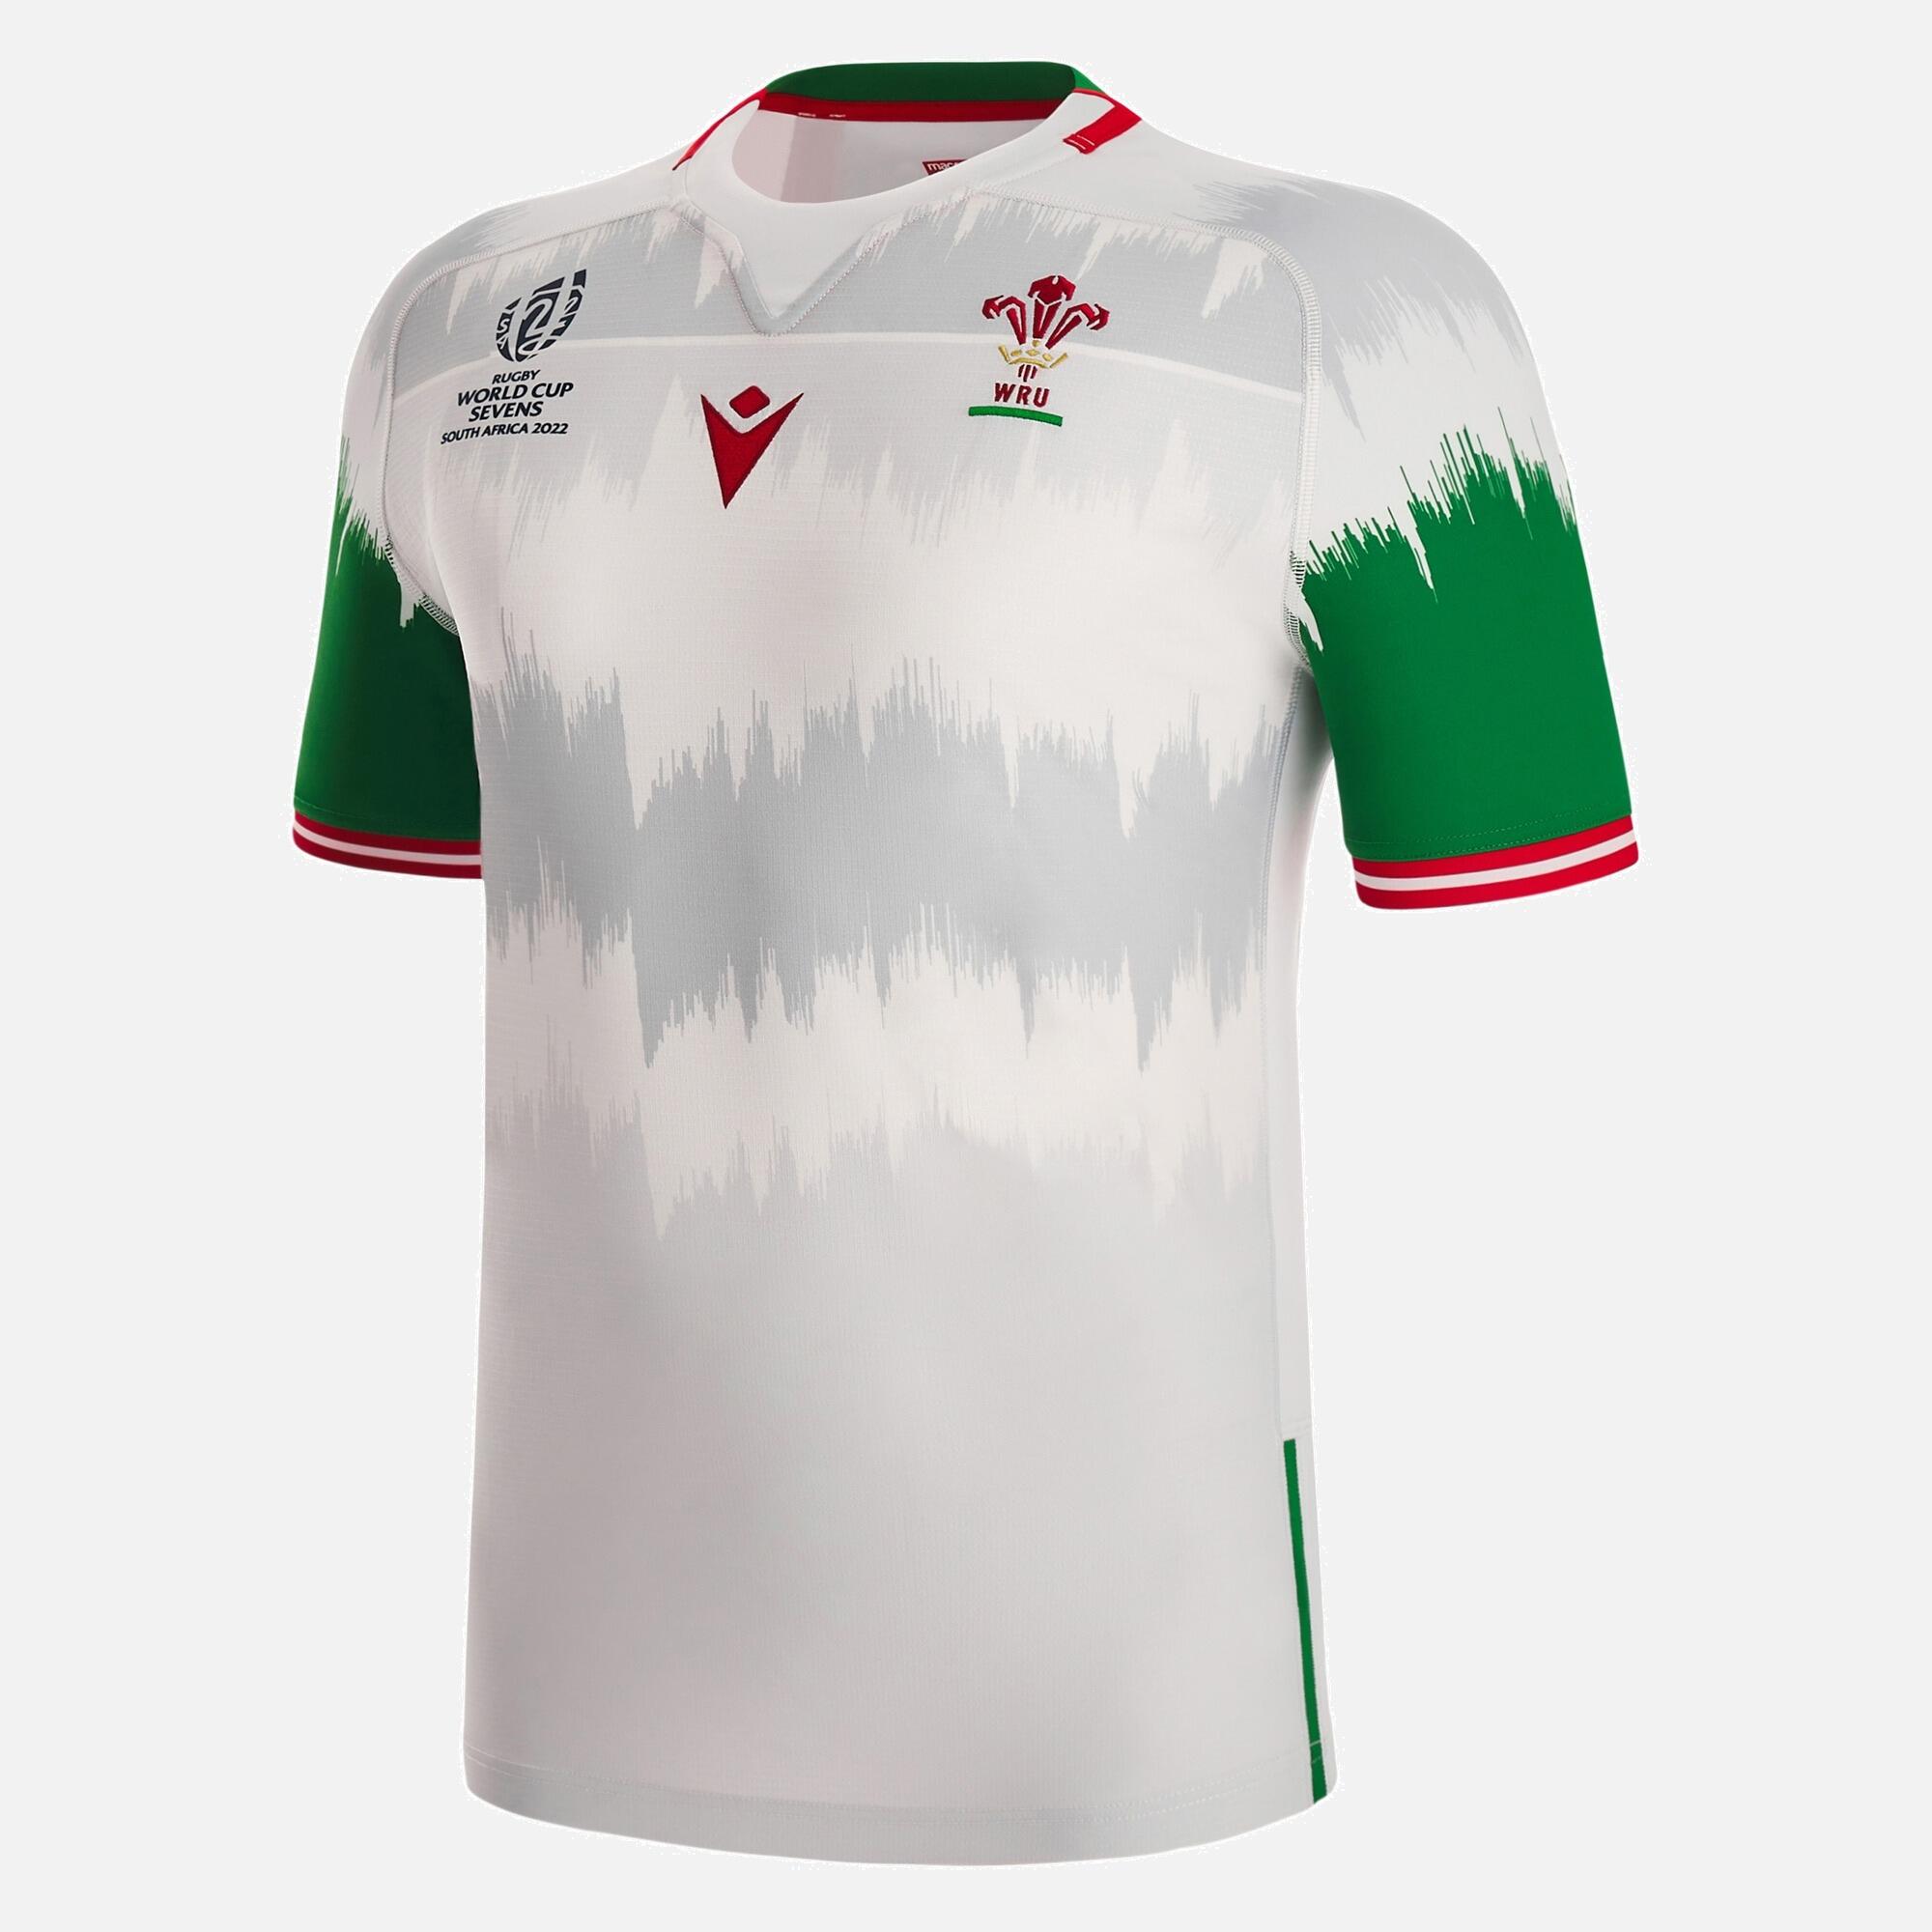 MACRON Macron Wales WRU 22/23 Away 7s Rugby World Cup Mens Technical Rugby Shirt